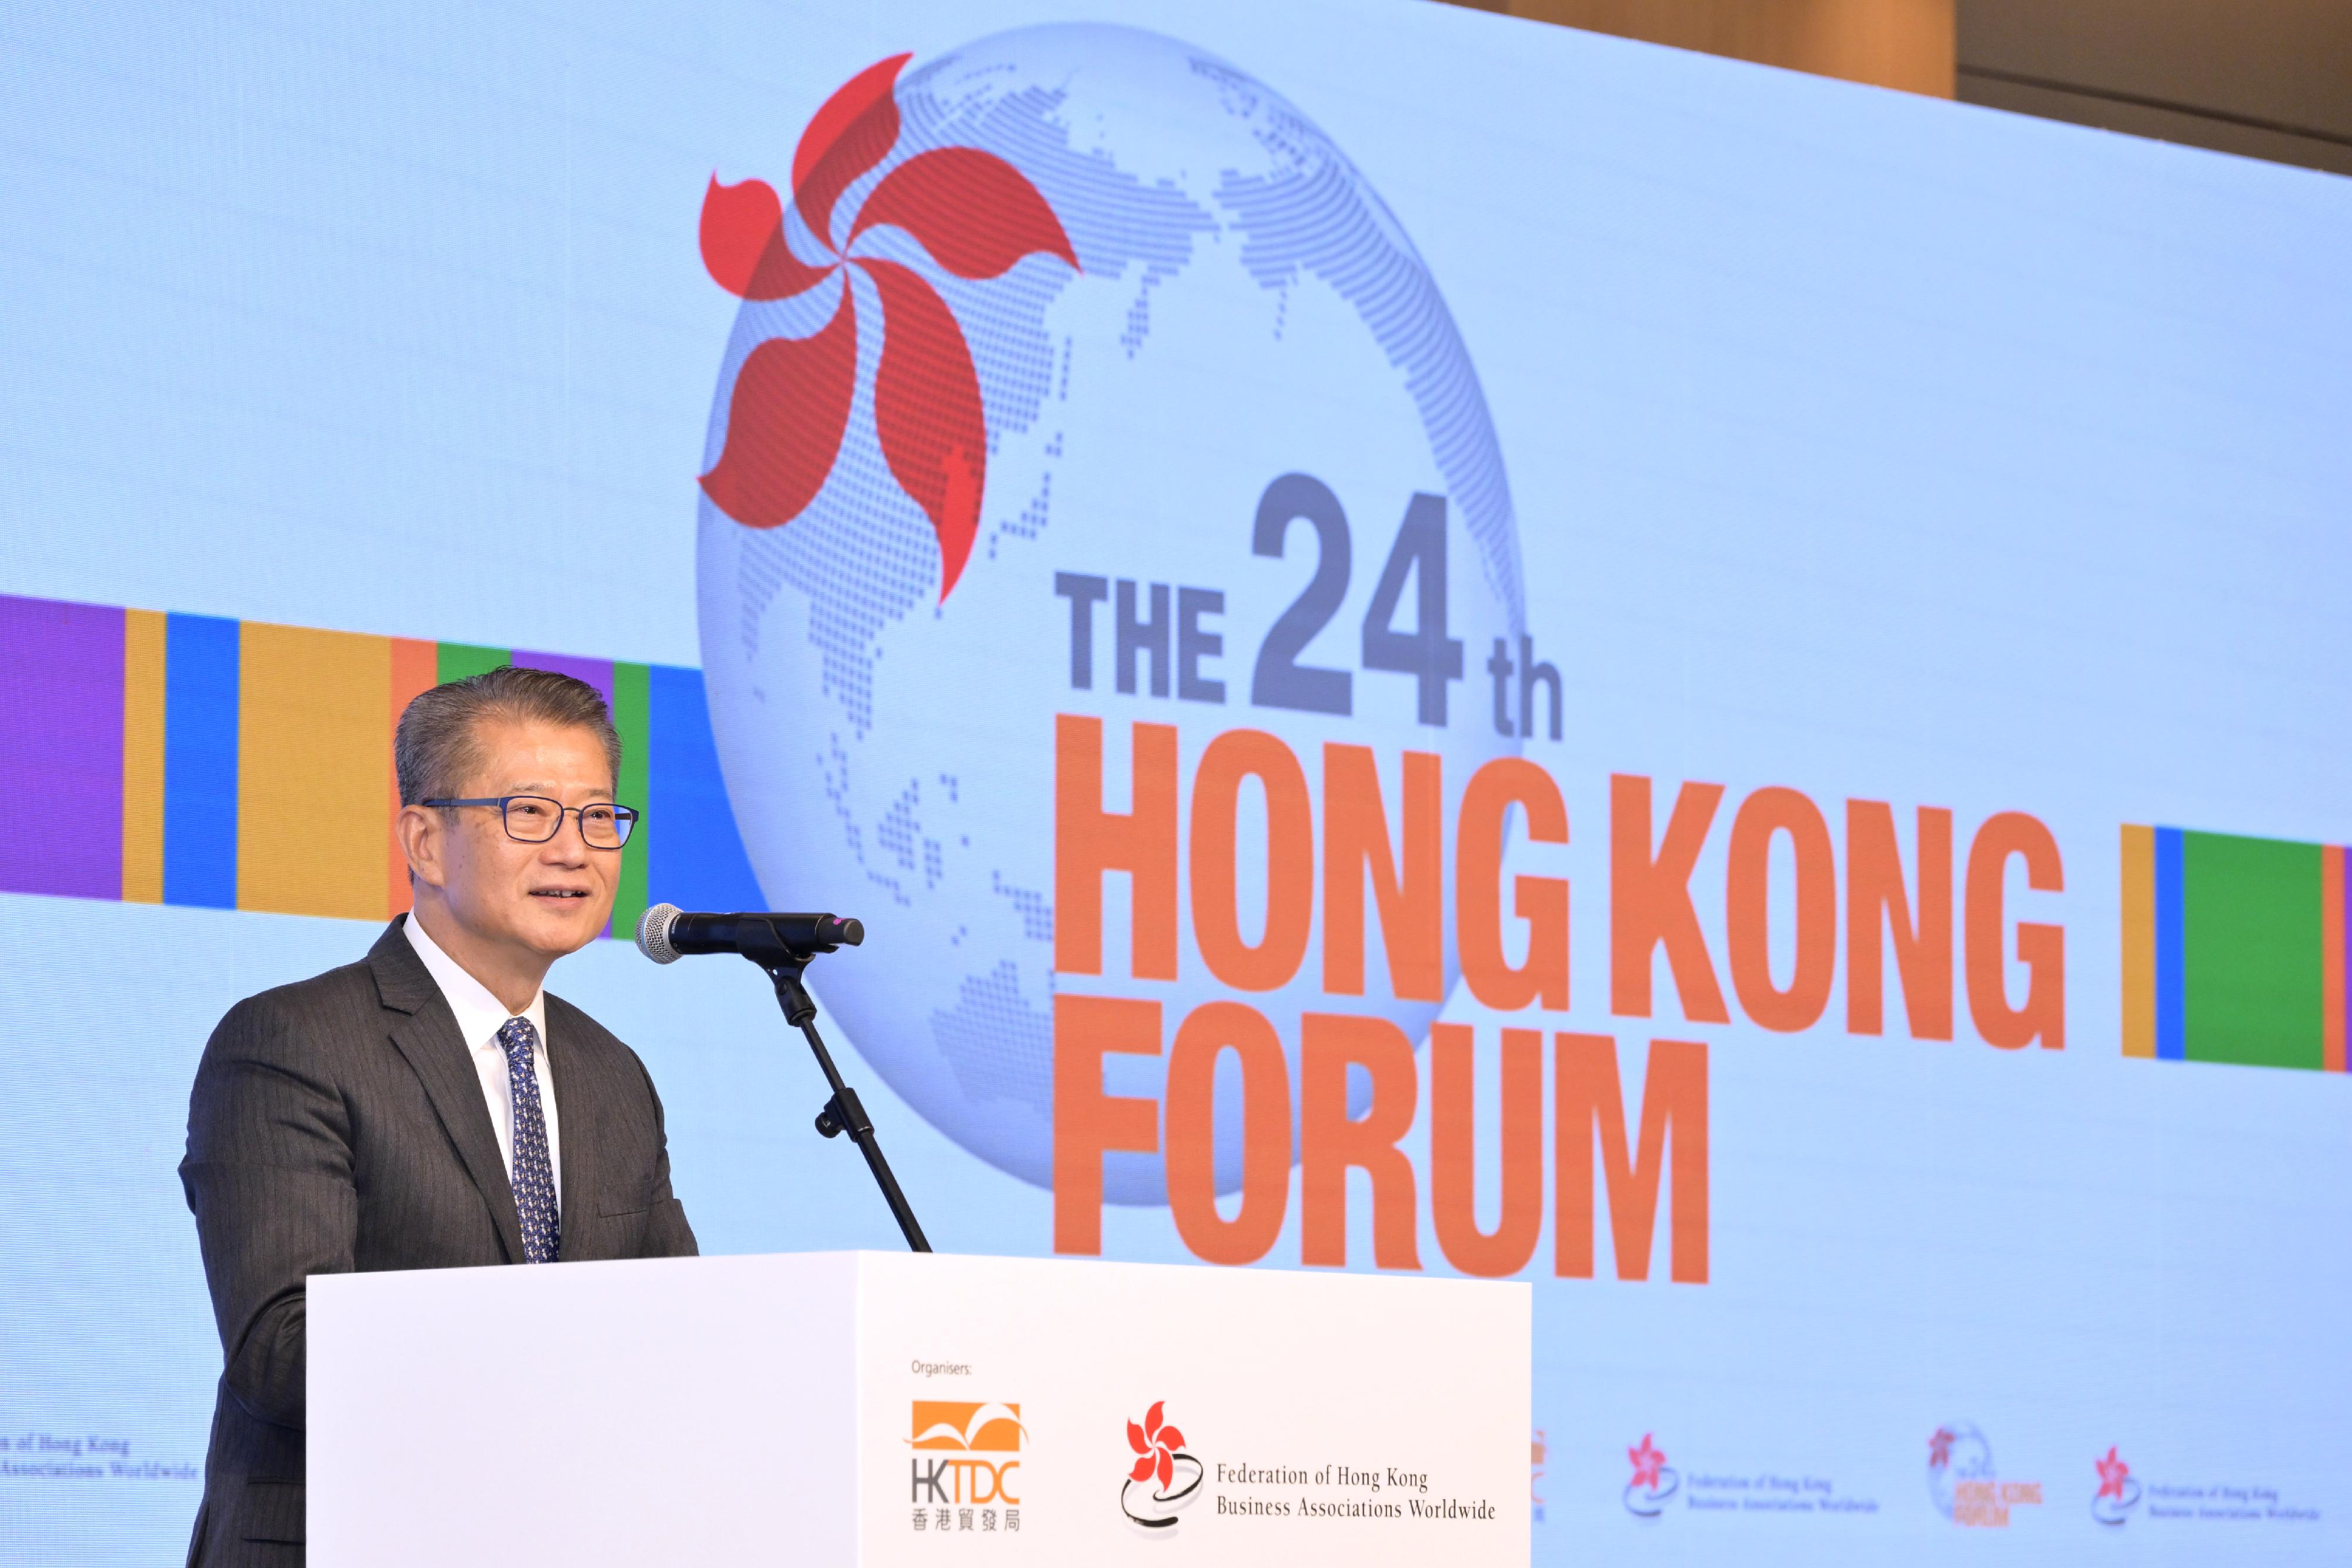 The Financial Secretary, Mr Paul Chan, speaks at the 24th Hong Kong Forum Keynote Luncheon today (December 6).